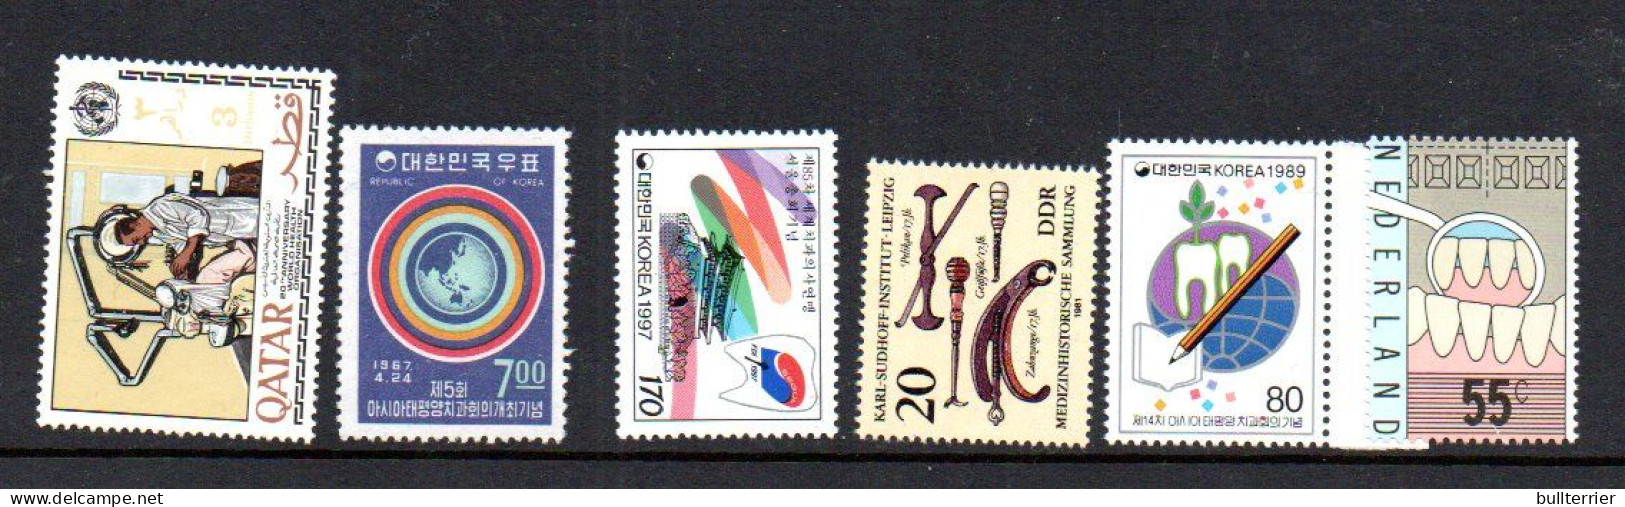 DENTISTRY - MNH SELECTION OF 50 STAMPS FROM VARIOUS COUNTRIES